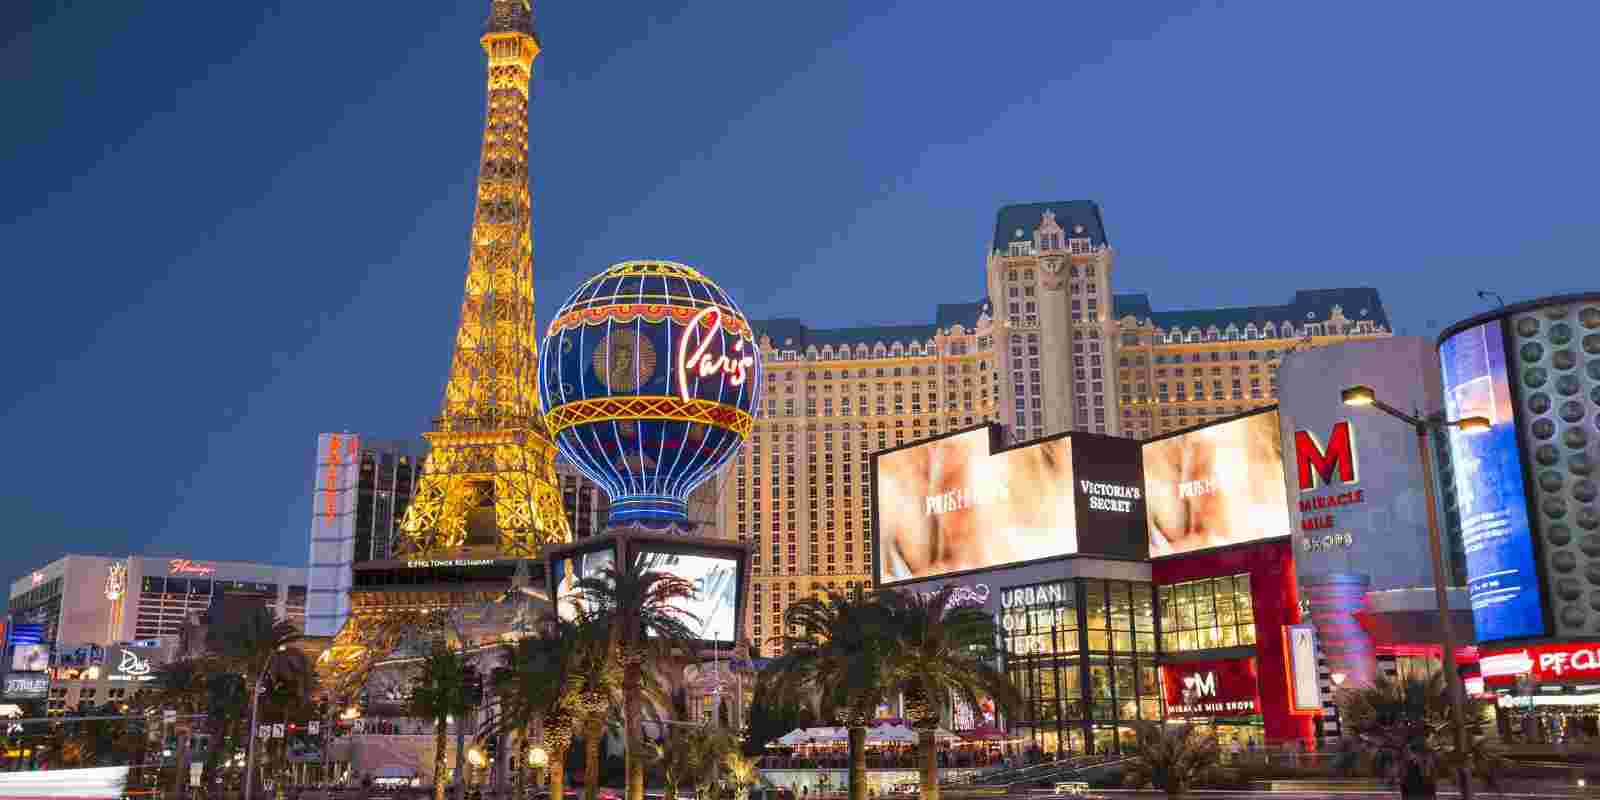 <h1>Hotels near Paint Party Night in Las Vegas</h1>